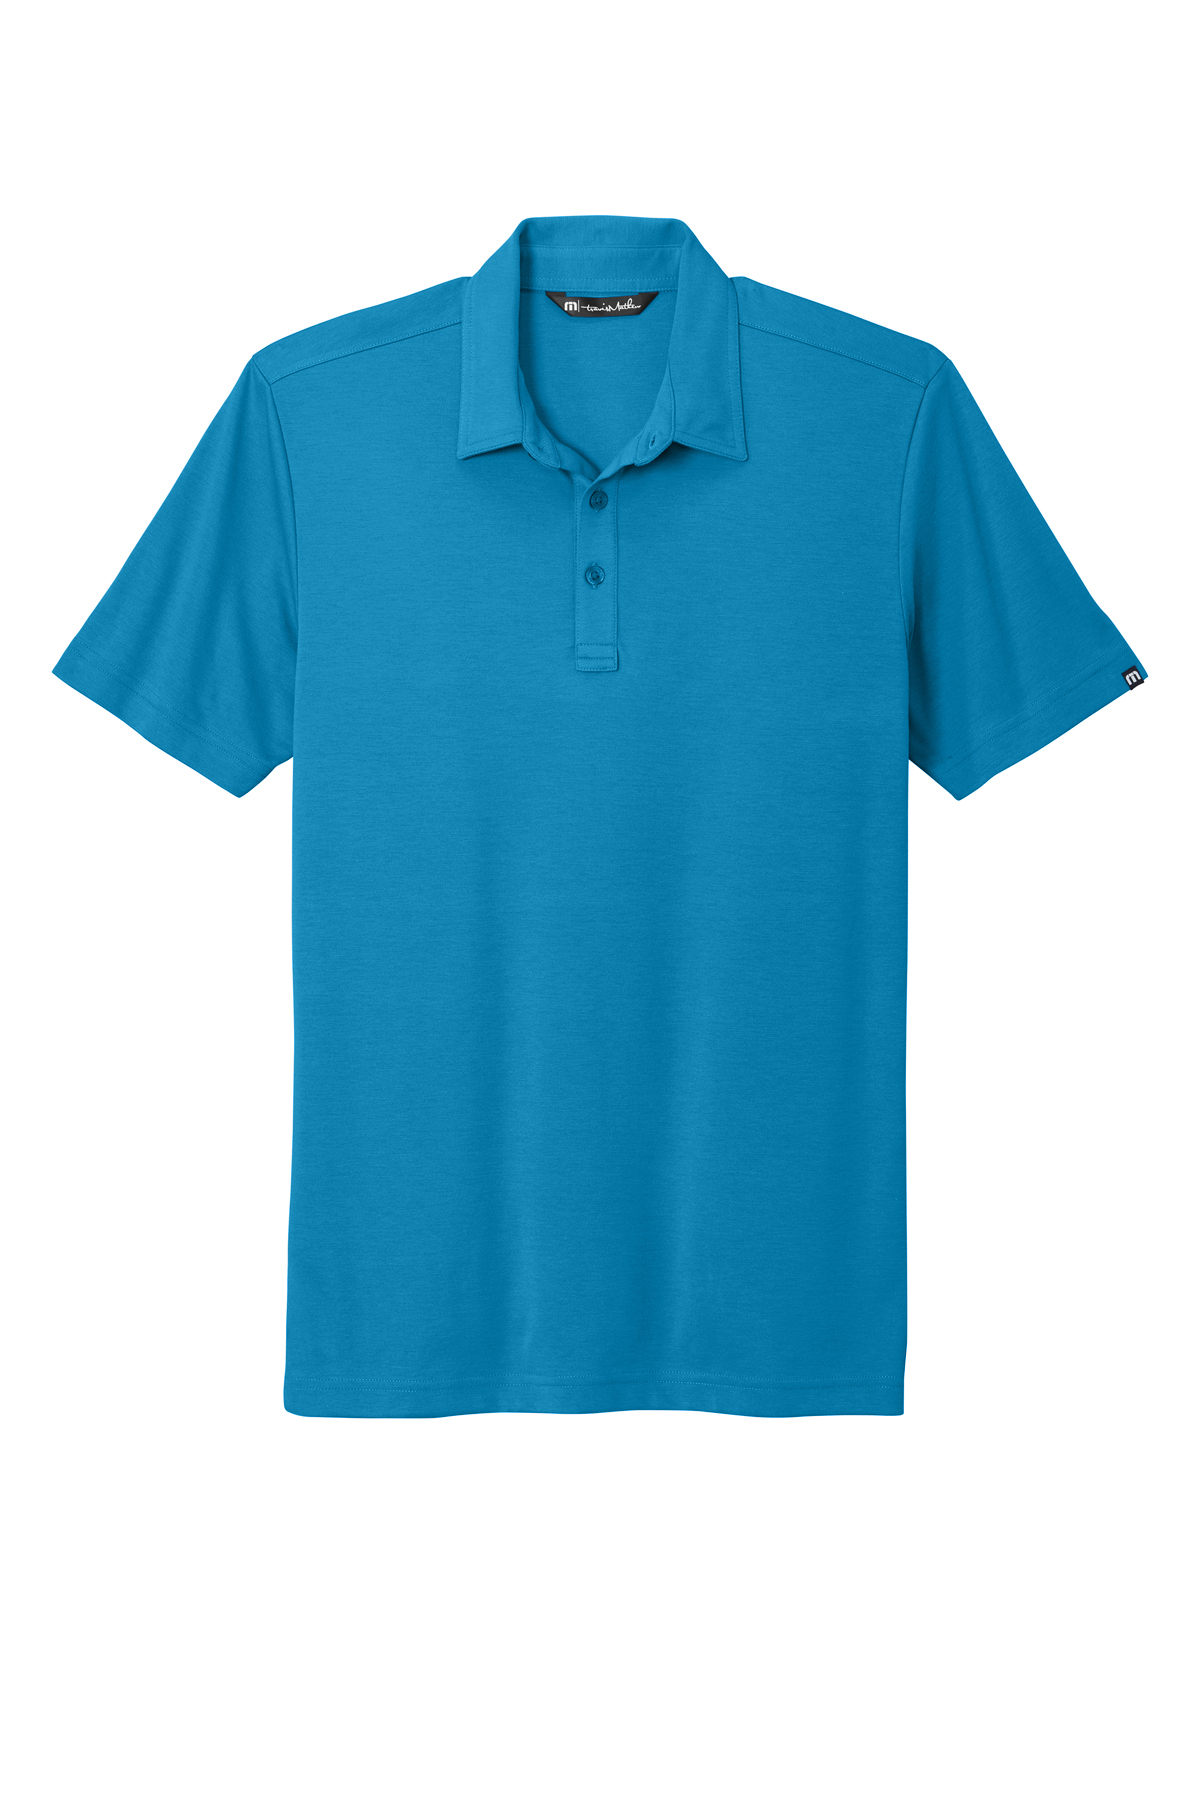 TravisMathew Oceanside Solid Polo | Product | Company Casuals